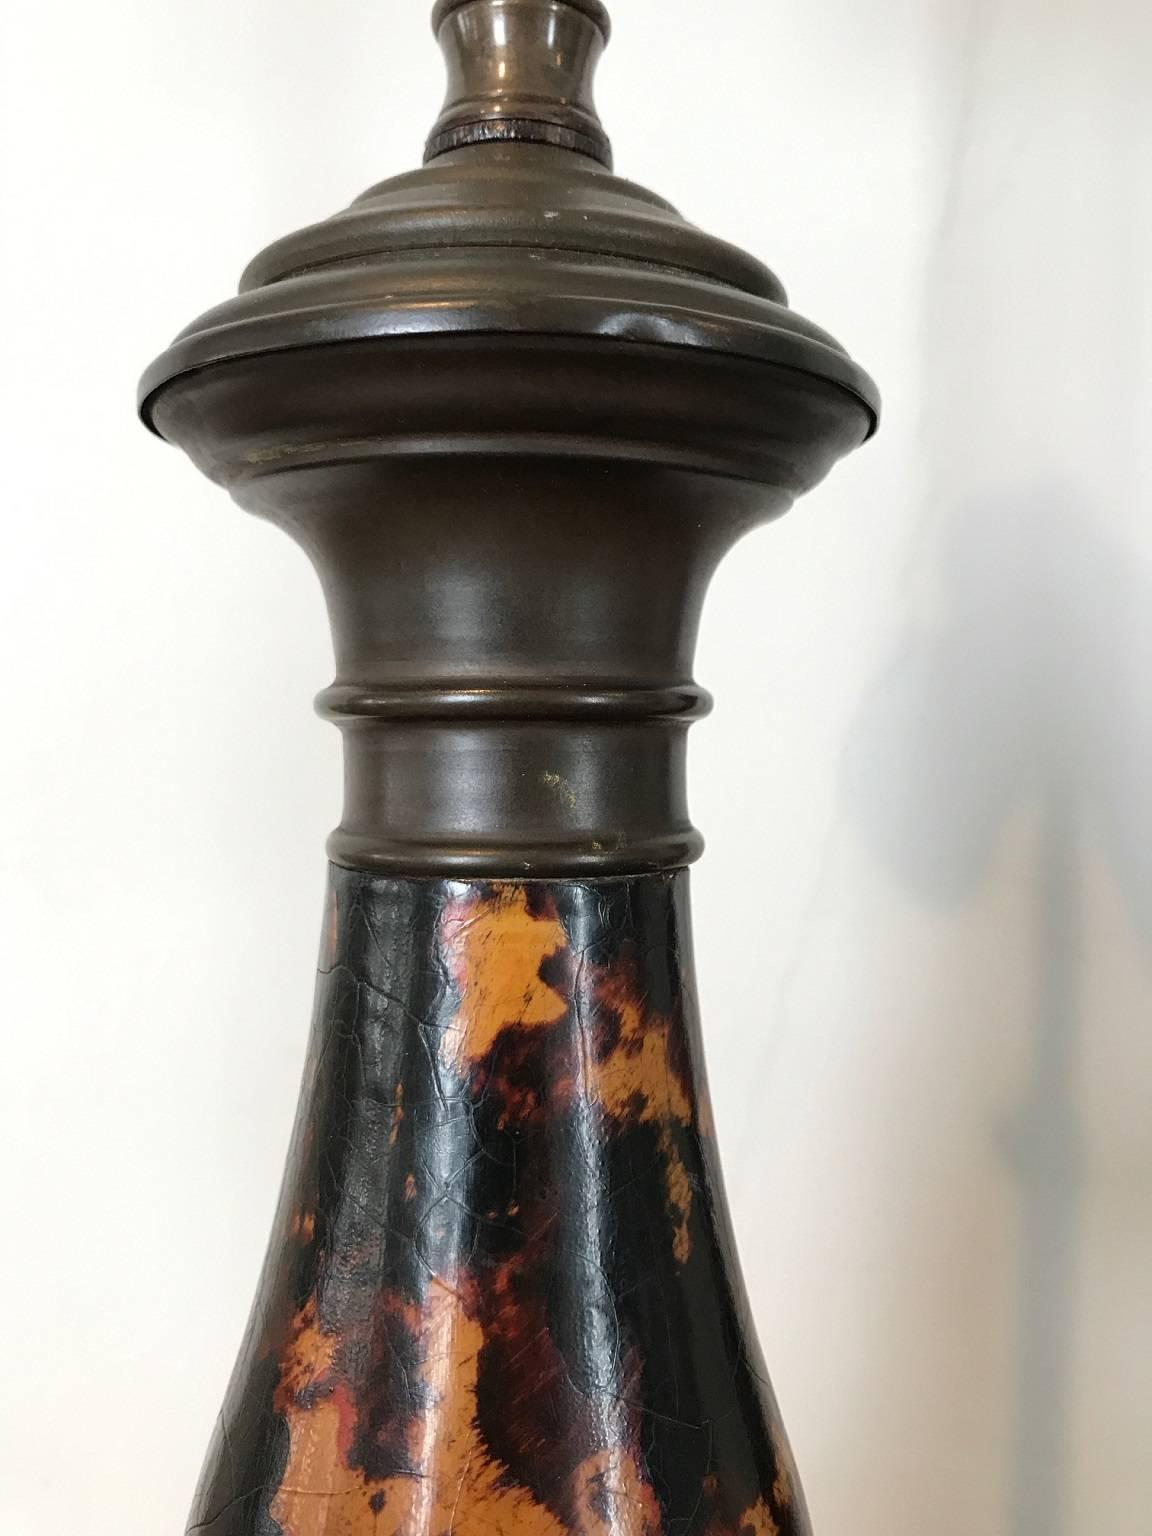 Pair of two-light table lamps with handsome faux-tortoise finish; baluster form body raised on an octagonal base; decorative details in bronzed metal; turn switch in the base.
 